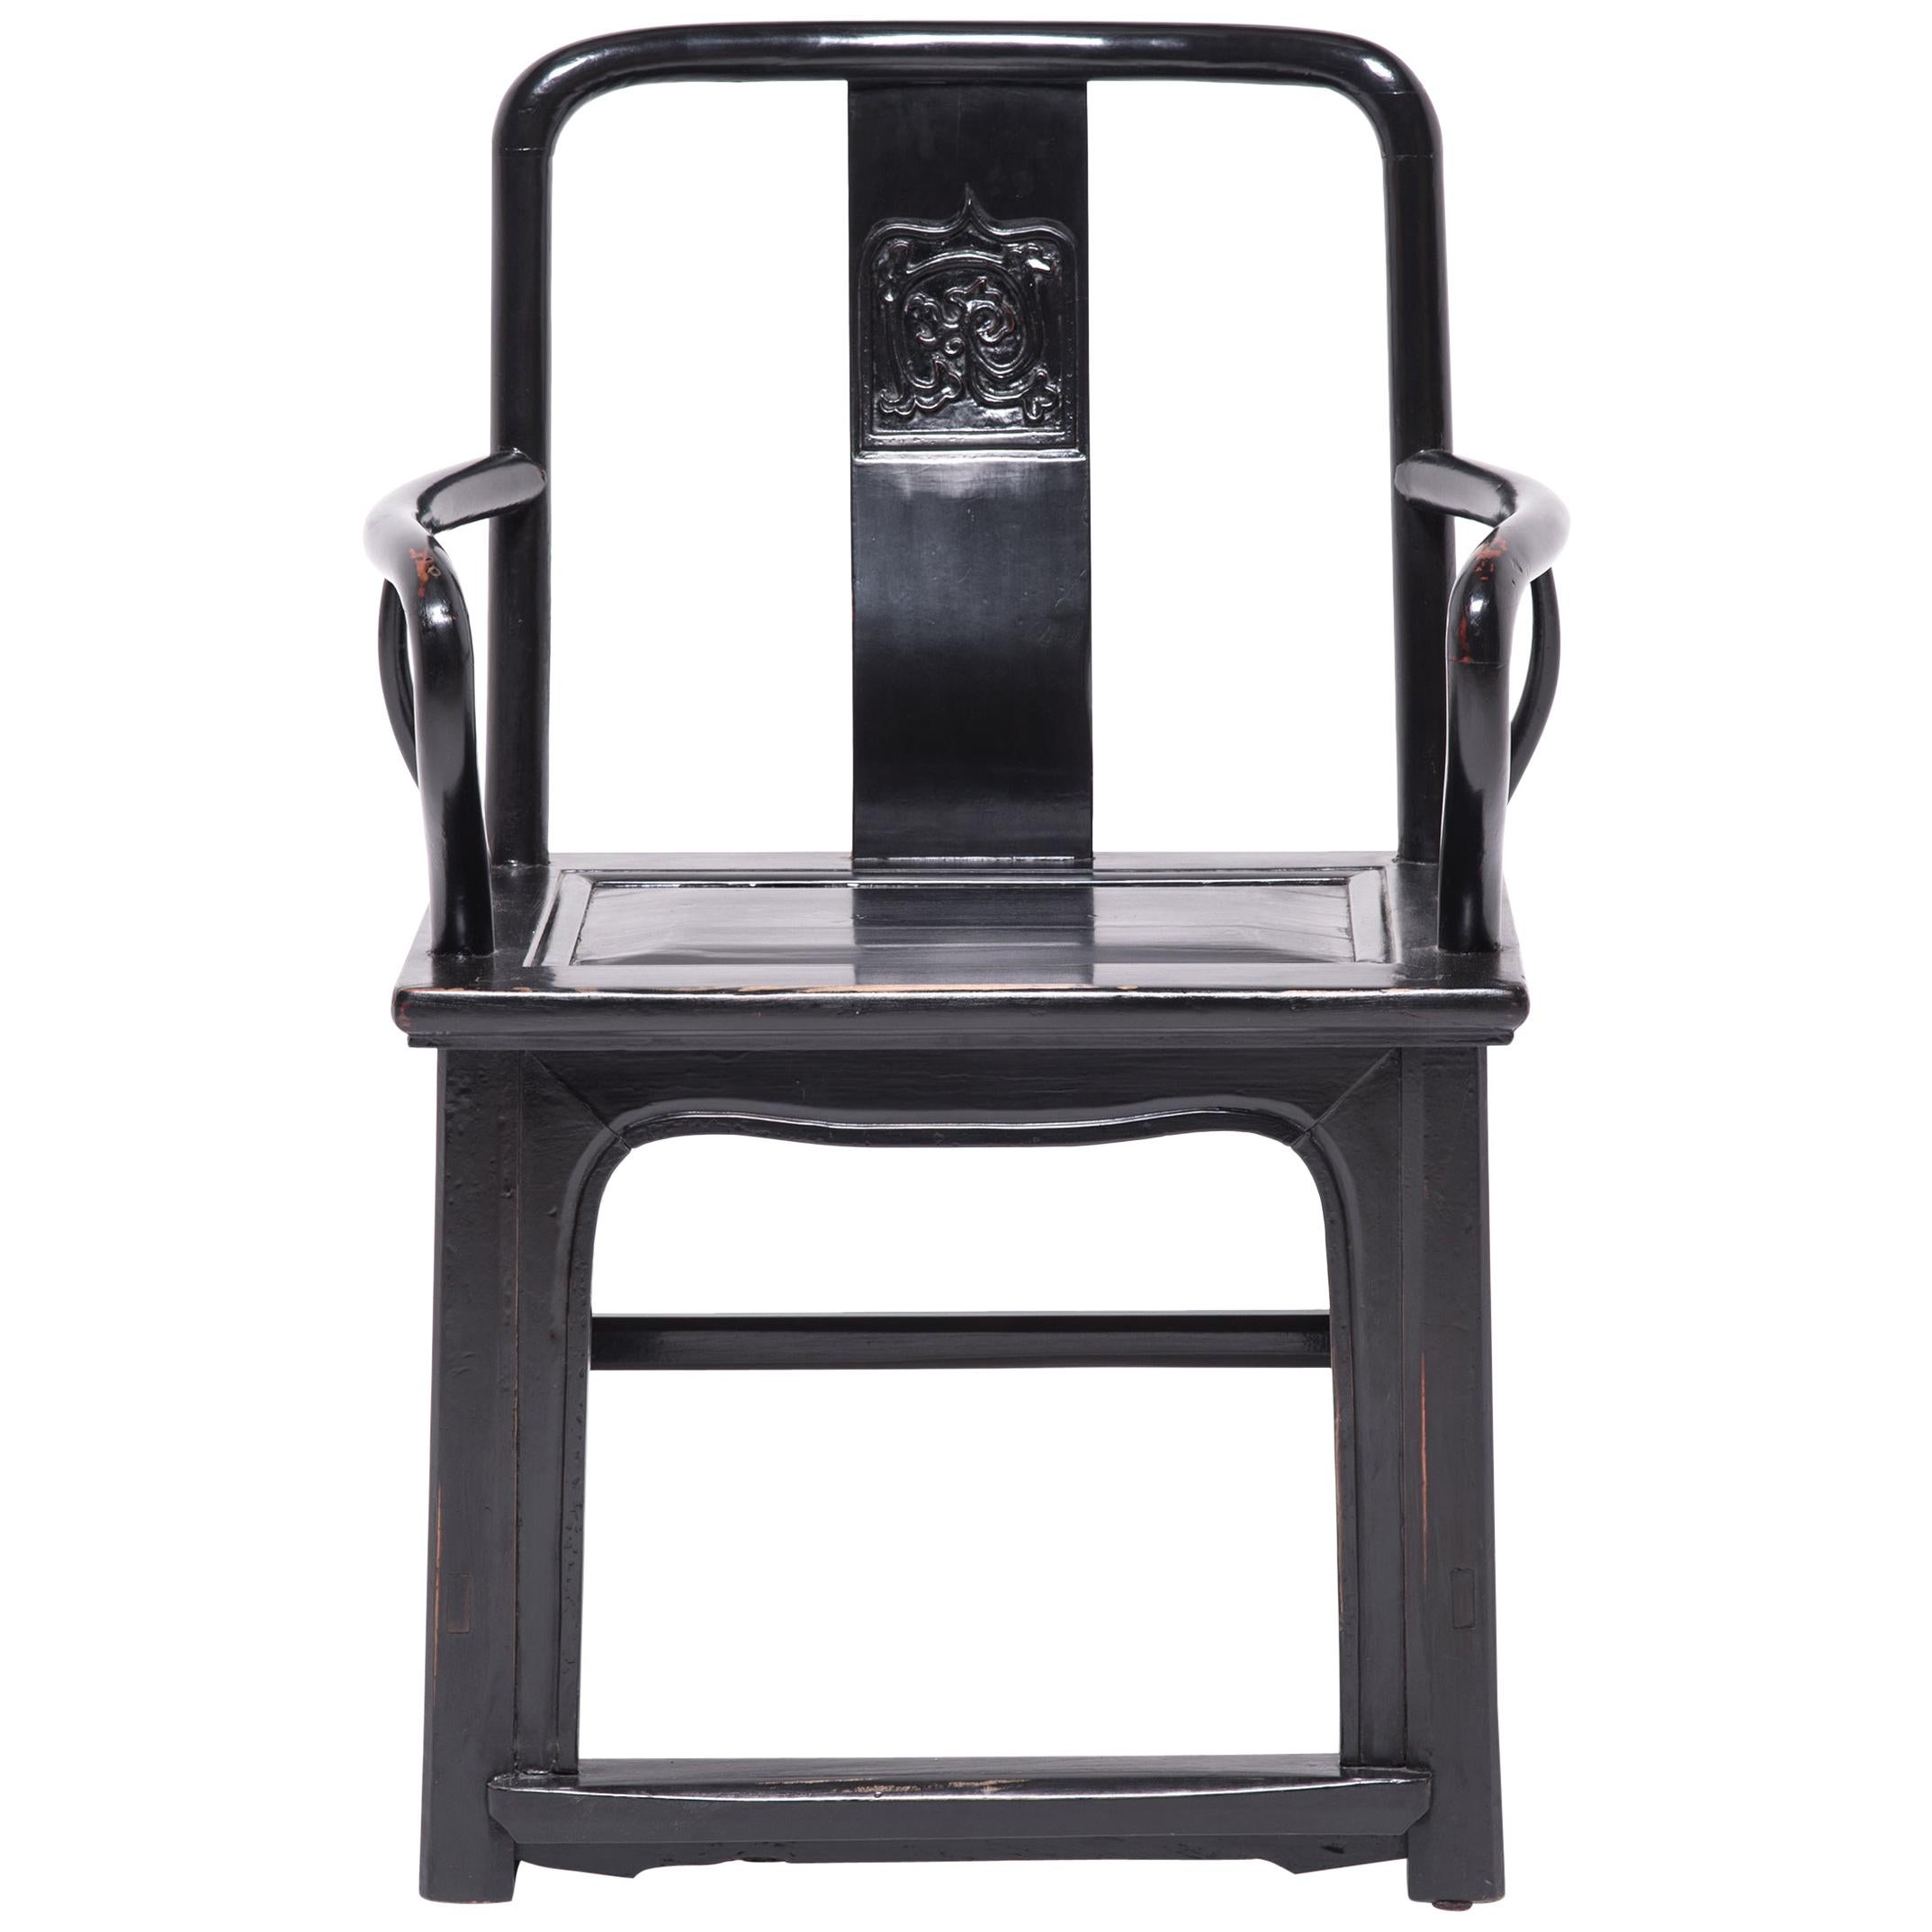 With strong lines and an upright stature, this imposing piece of furniture was the chair of choice for a 19th century administrator in northern China. Made of northern elmwood, these chairs have an elegant yet minimalist design, with sinuous lines